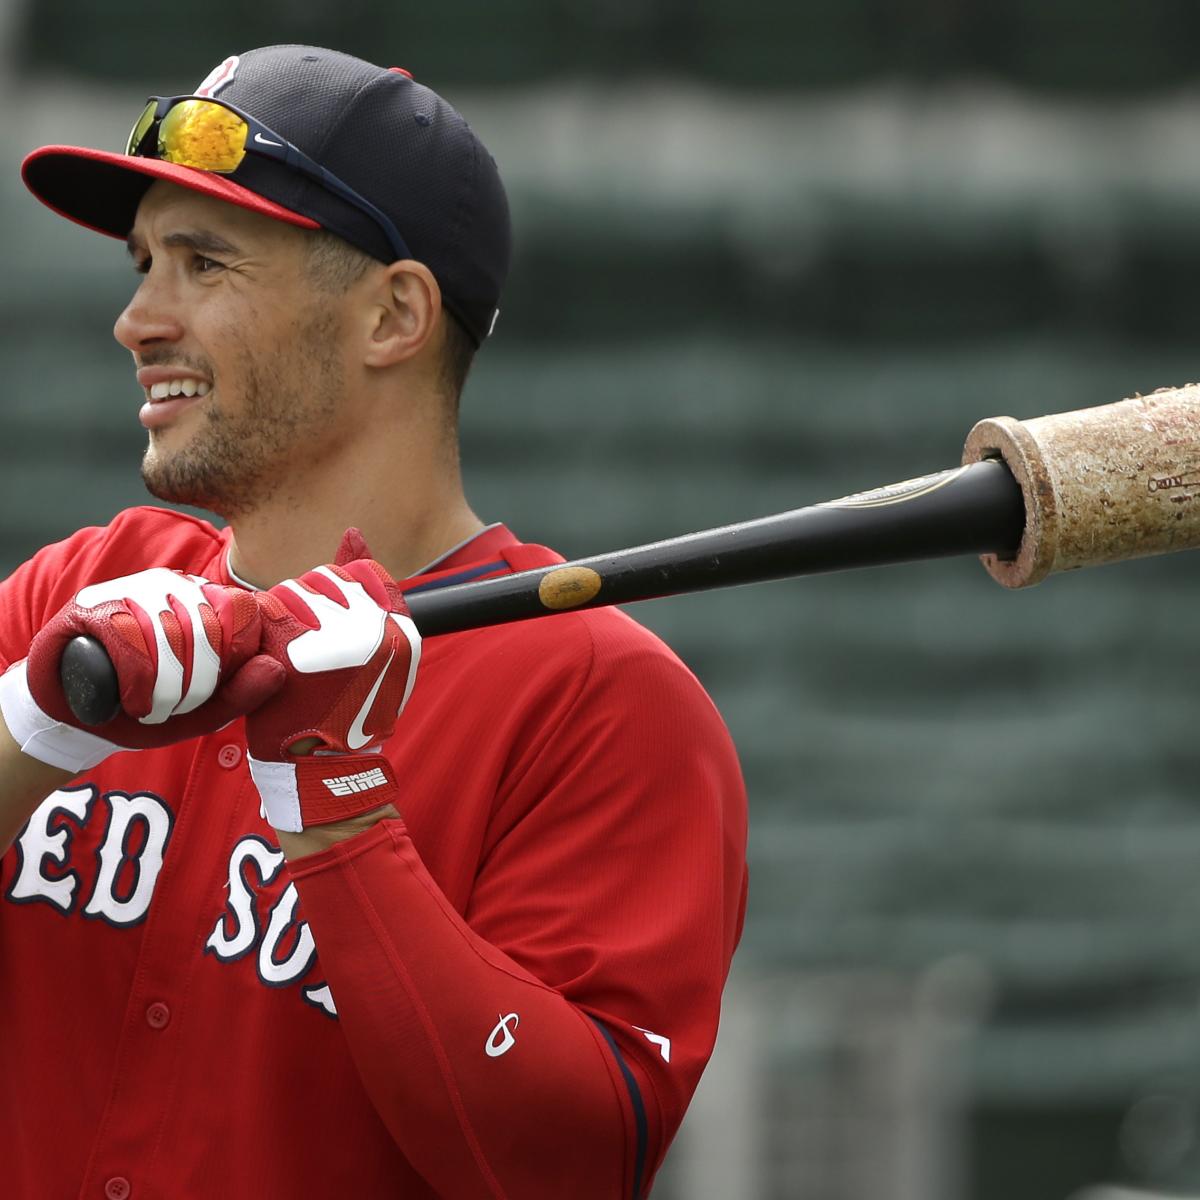 Early Returns on Grady Sizemore as Red Sox's Starting Center Fielder